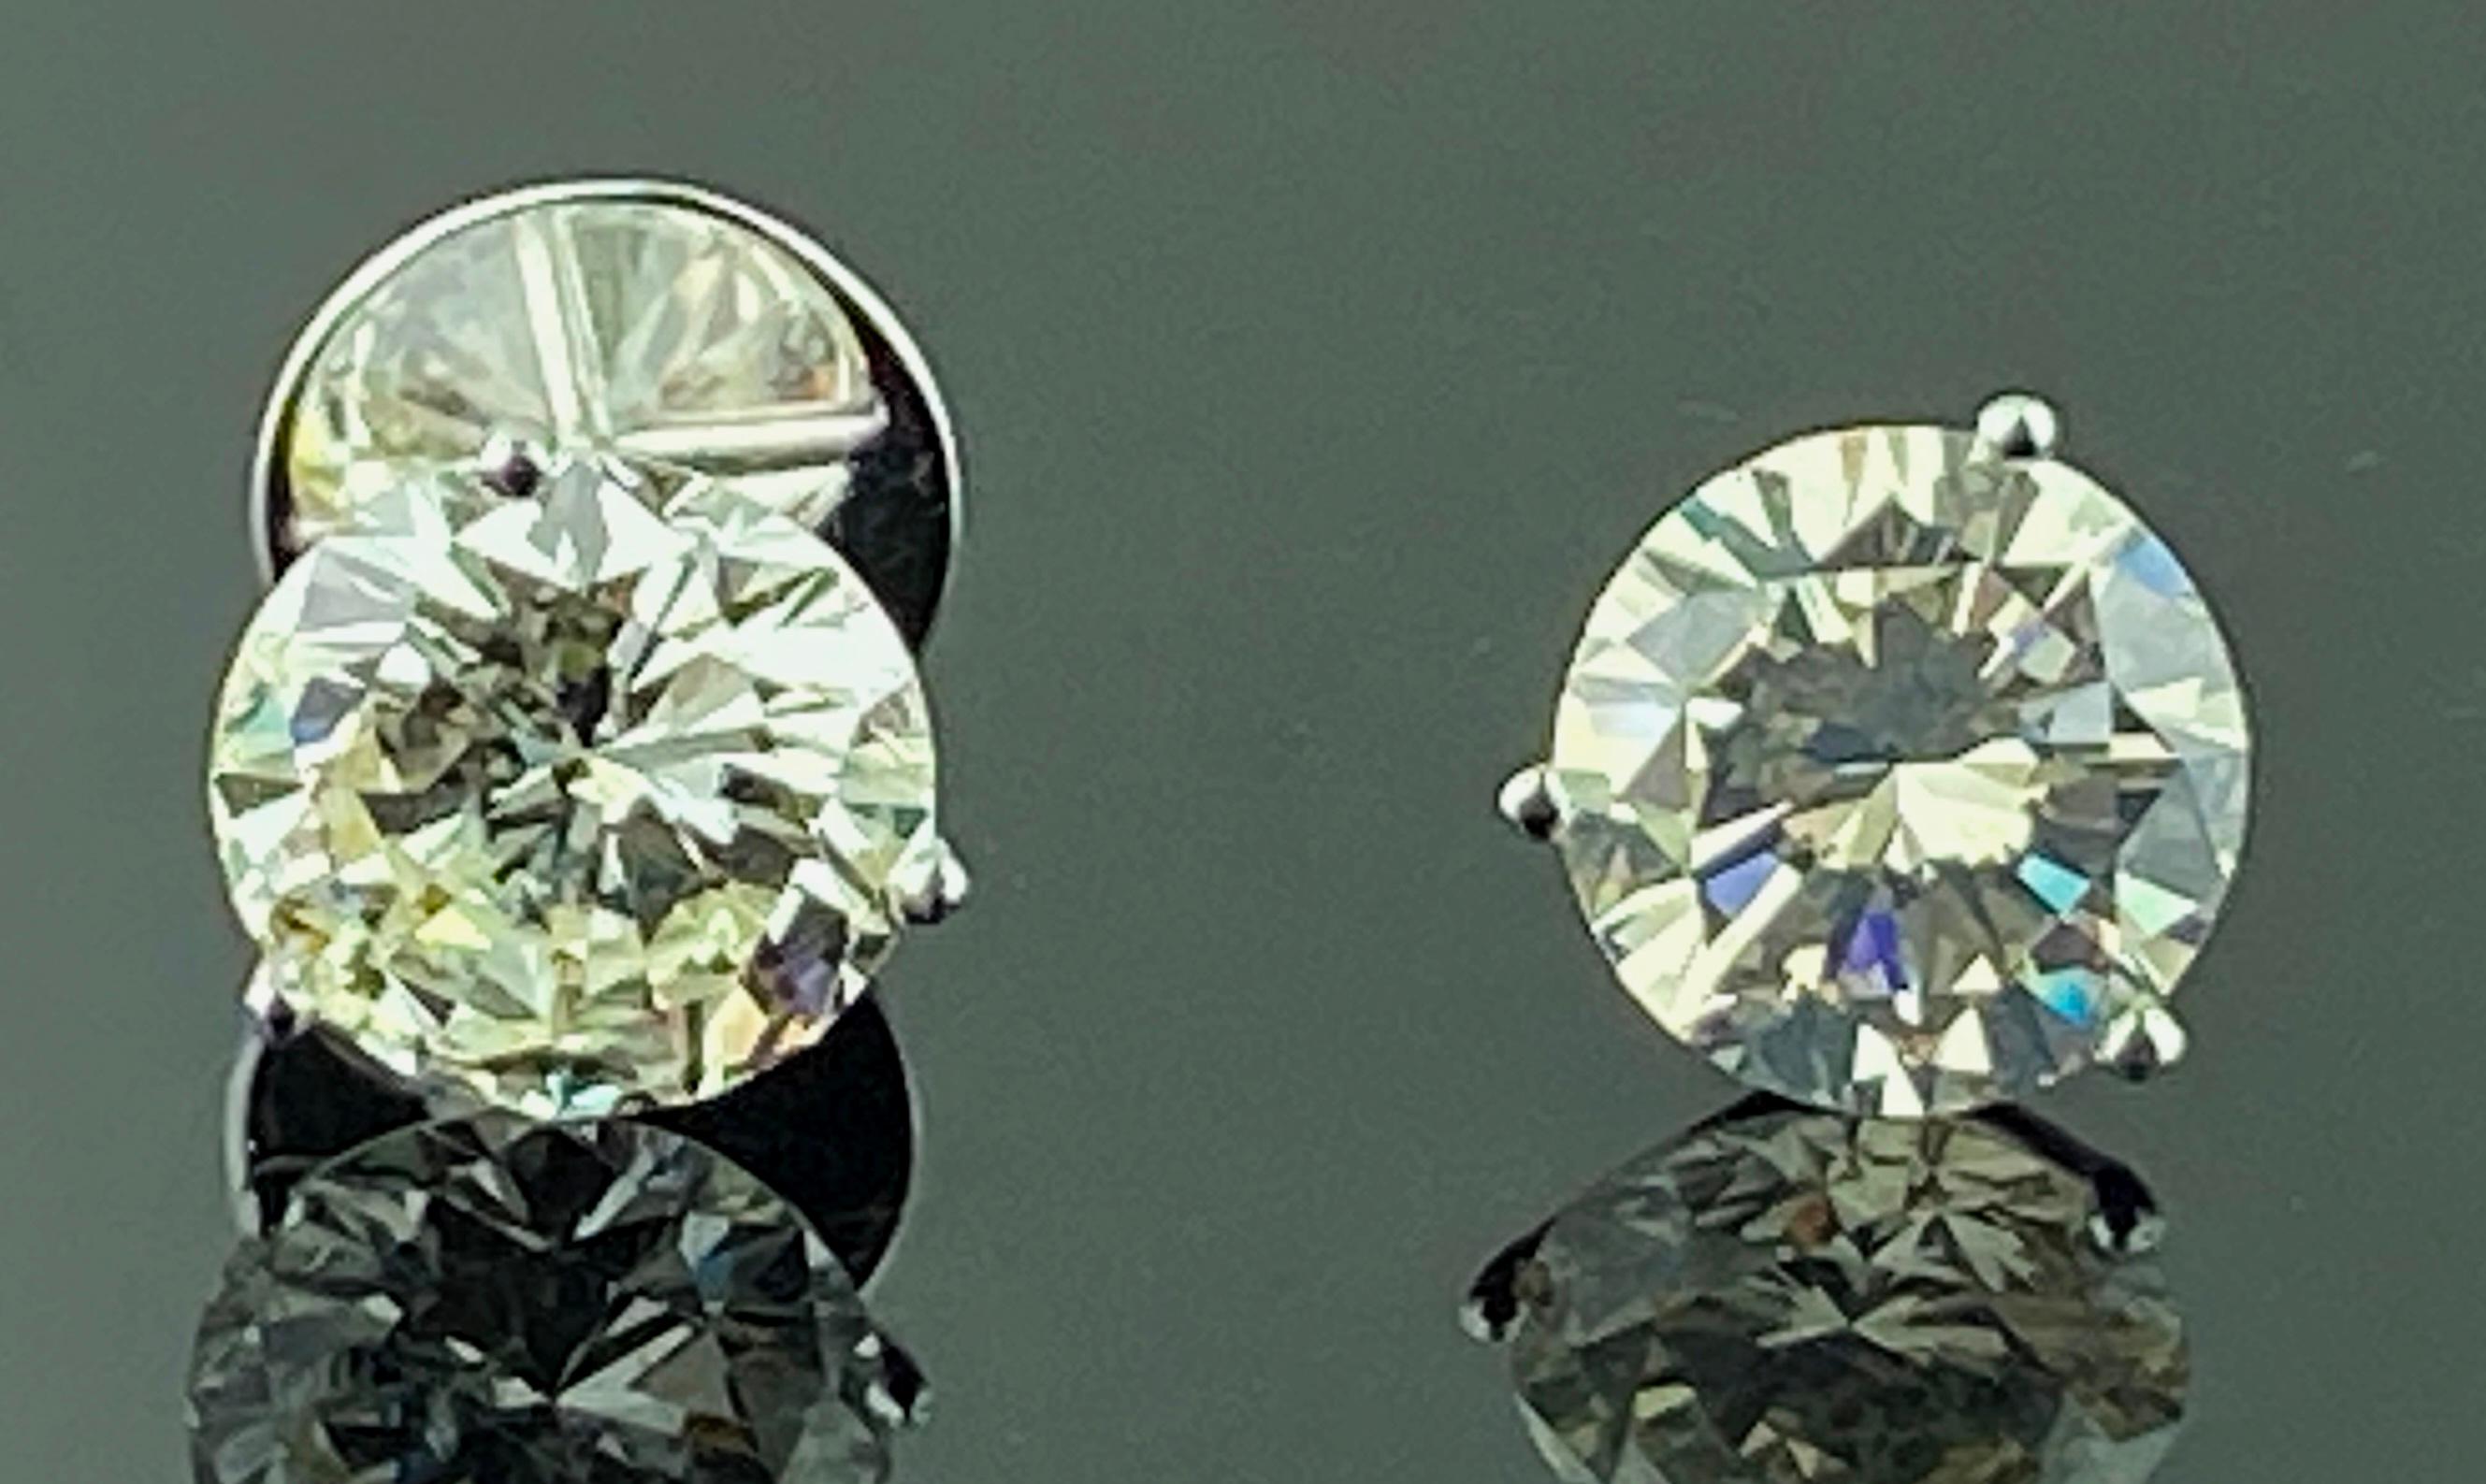 Set in 18 karat white gold are two round Brilliant Cut Diamond Stud earrings.  One is 7.19 carats, Color: Q-R, Clarity: SI-1, GIA Report #1196482822.  The other is 7.87 carats, Color: M, Clarity: I-1, GIA Report # 1192482832.